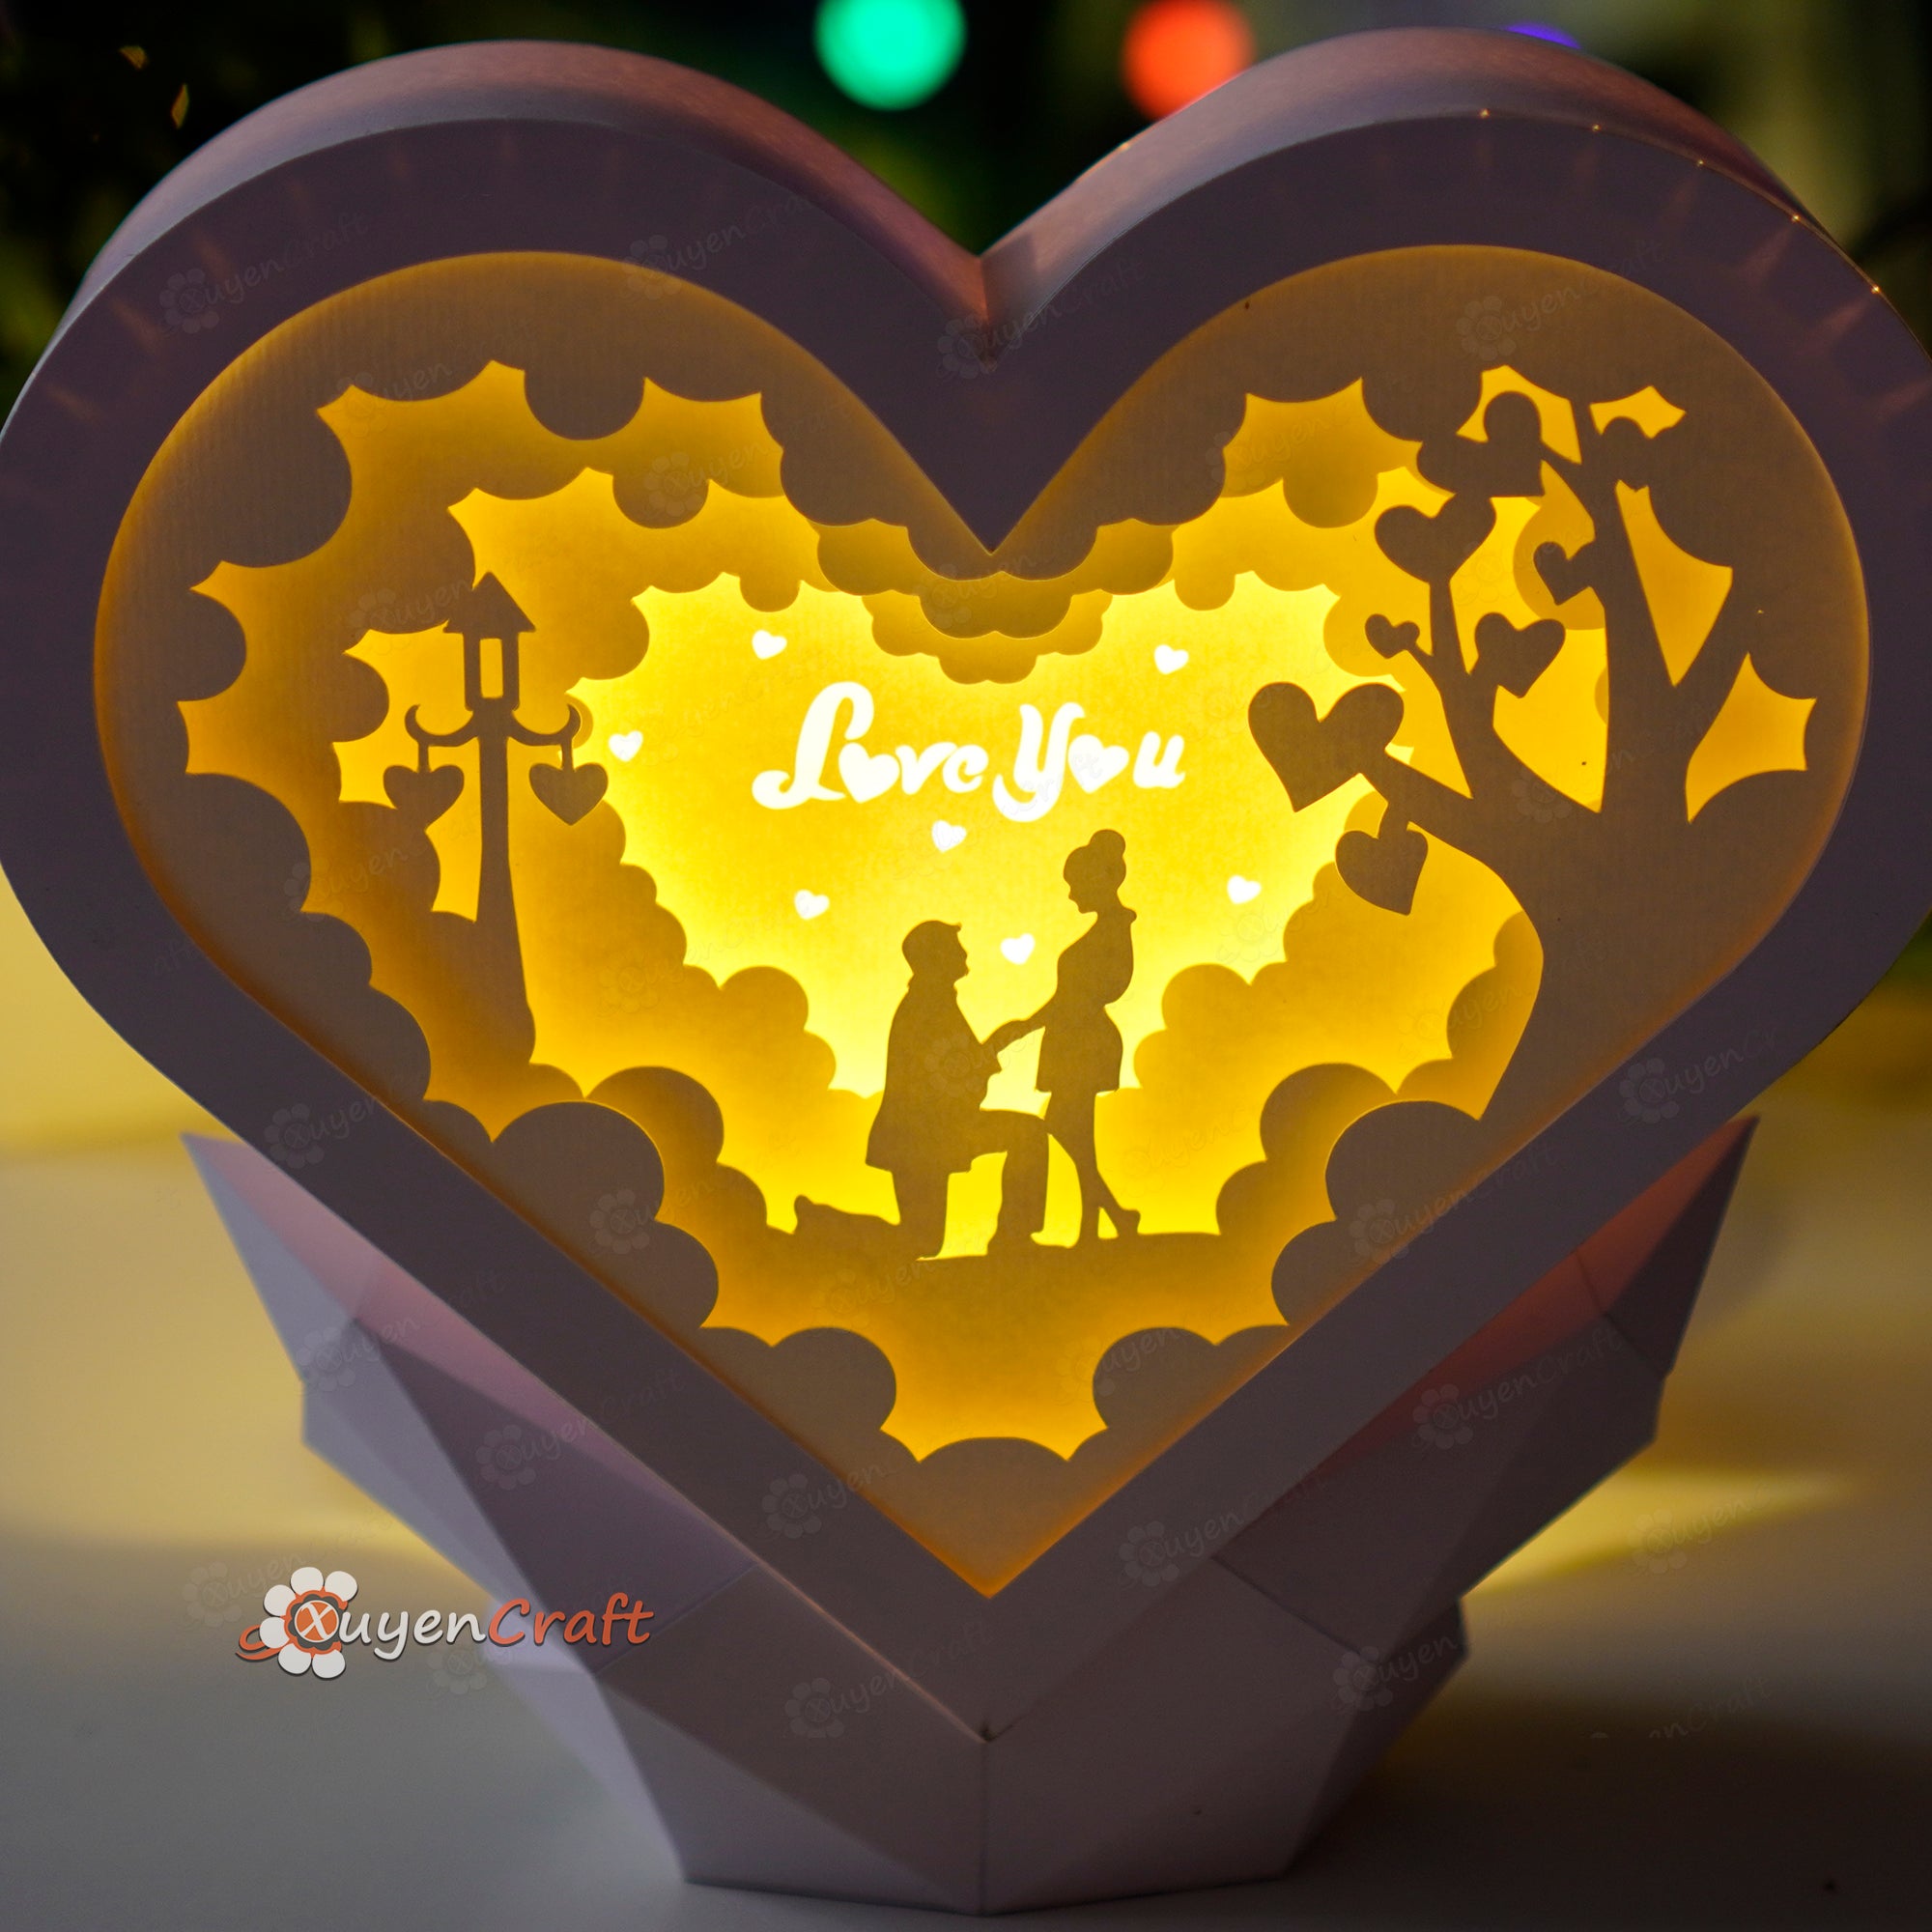 Romantic Proposal Couple in Heart Lanterns Shadow Box SVG for Cricut Projects, Cameo4, ScanNcut